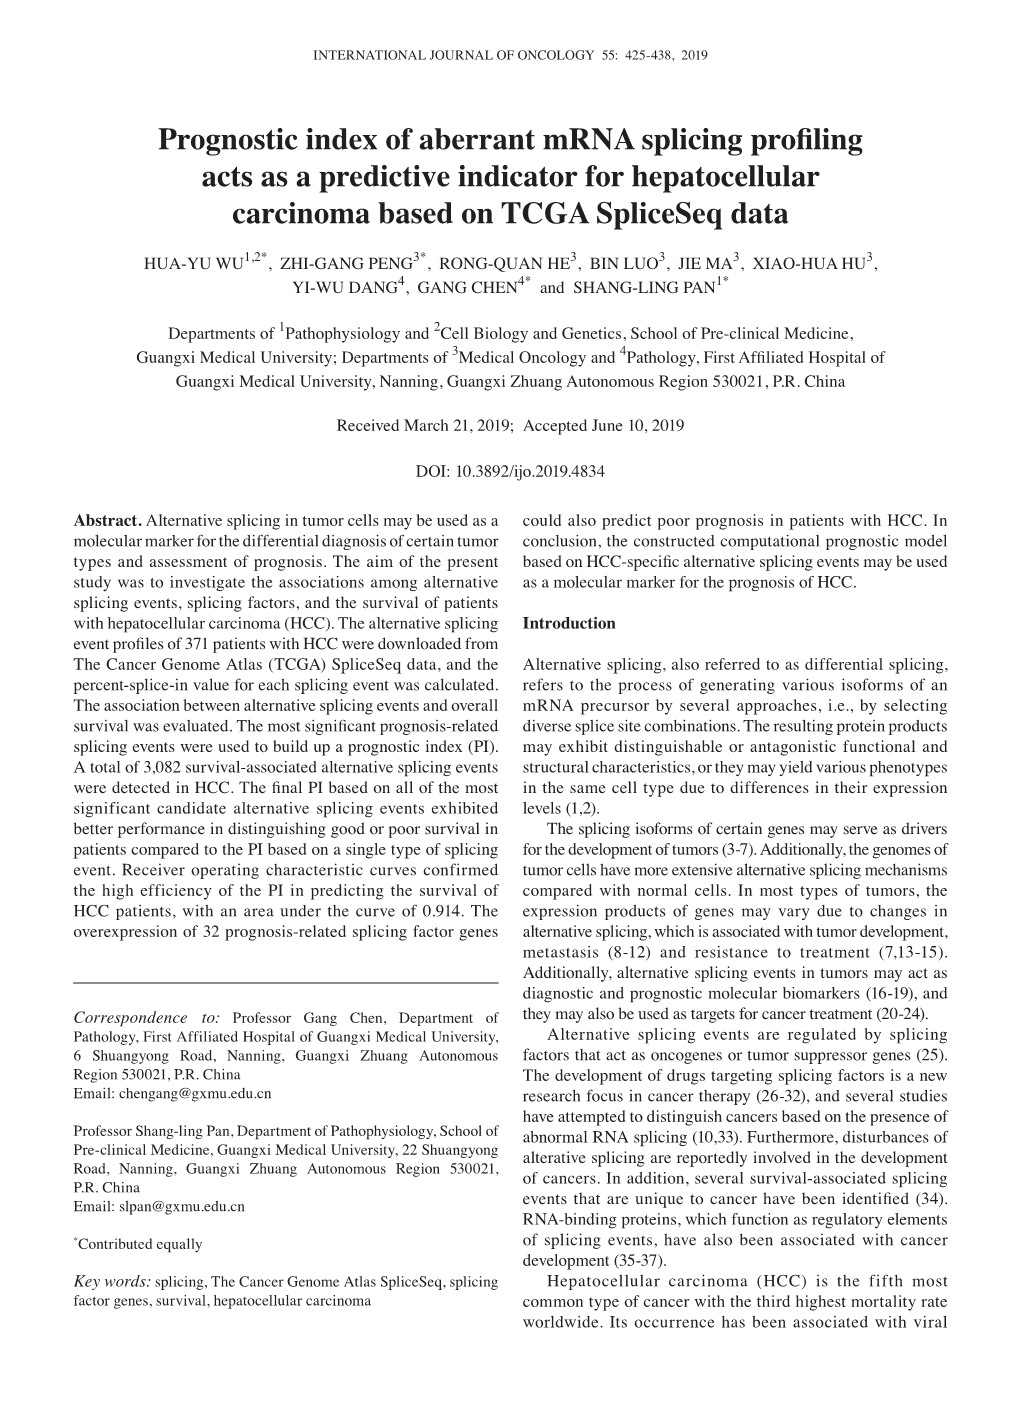 Prognostic Index of Aberrant Mrna Splicing Profiling Acts As a Predictive Indicator for Hepatocellular Carcinoma Based on TCGA Spliceseq Data